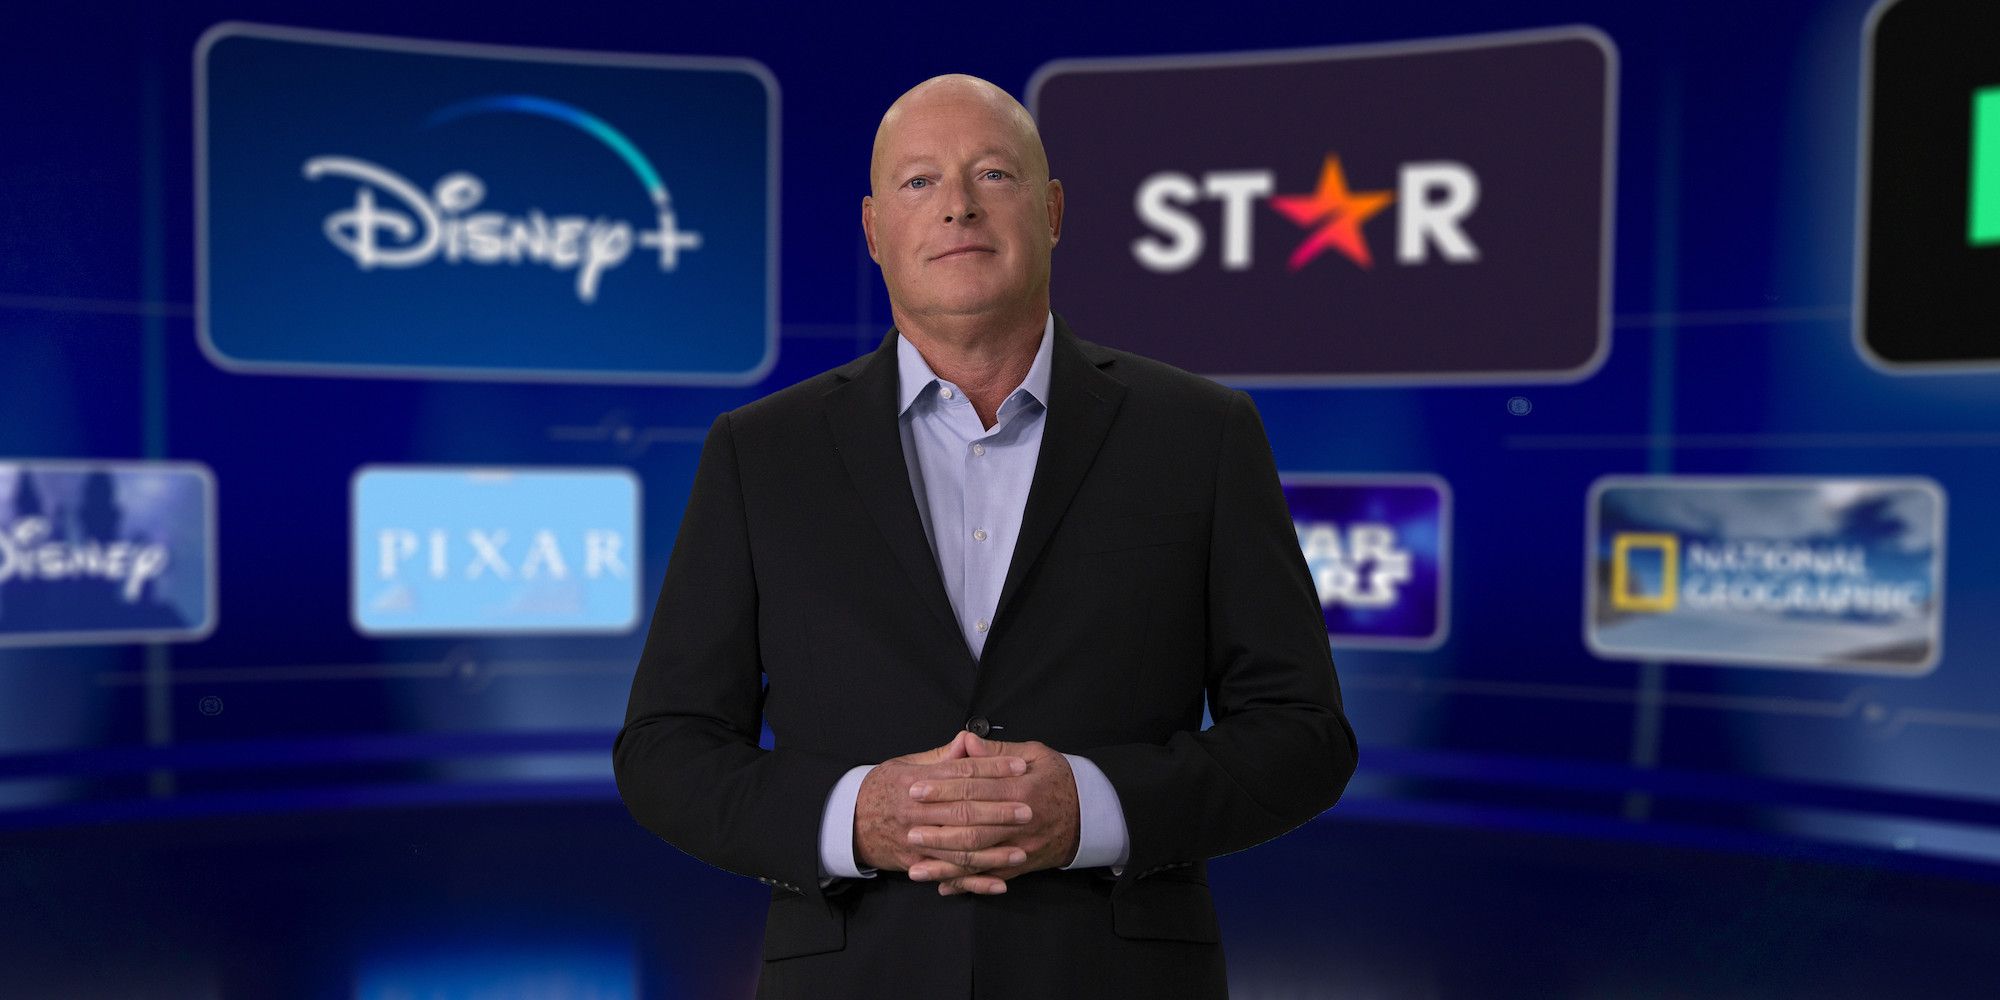 Disney ceo bob chapek in front of the disney plus and star logos